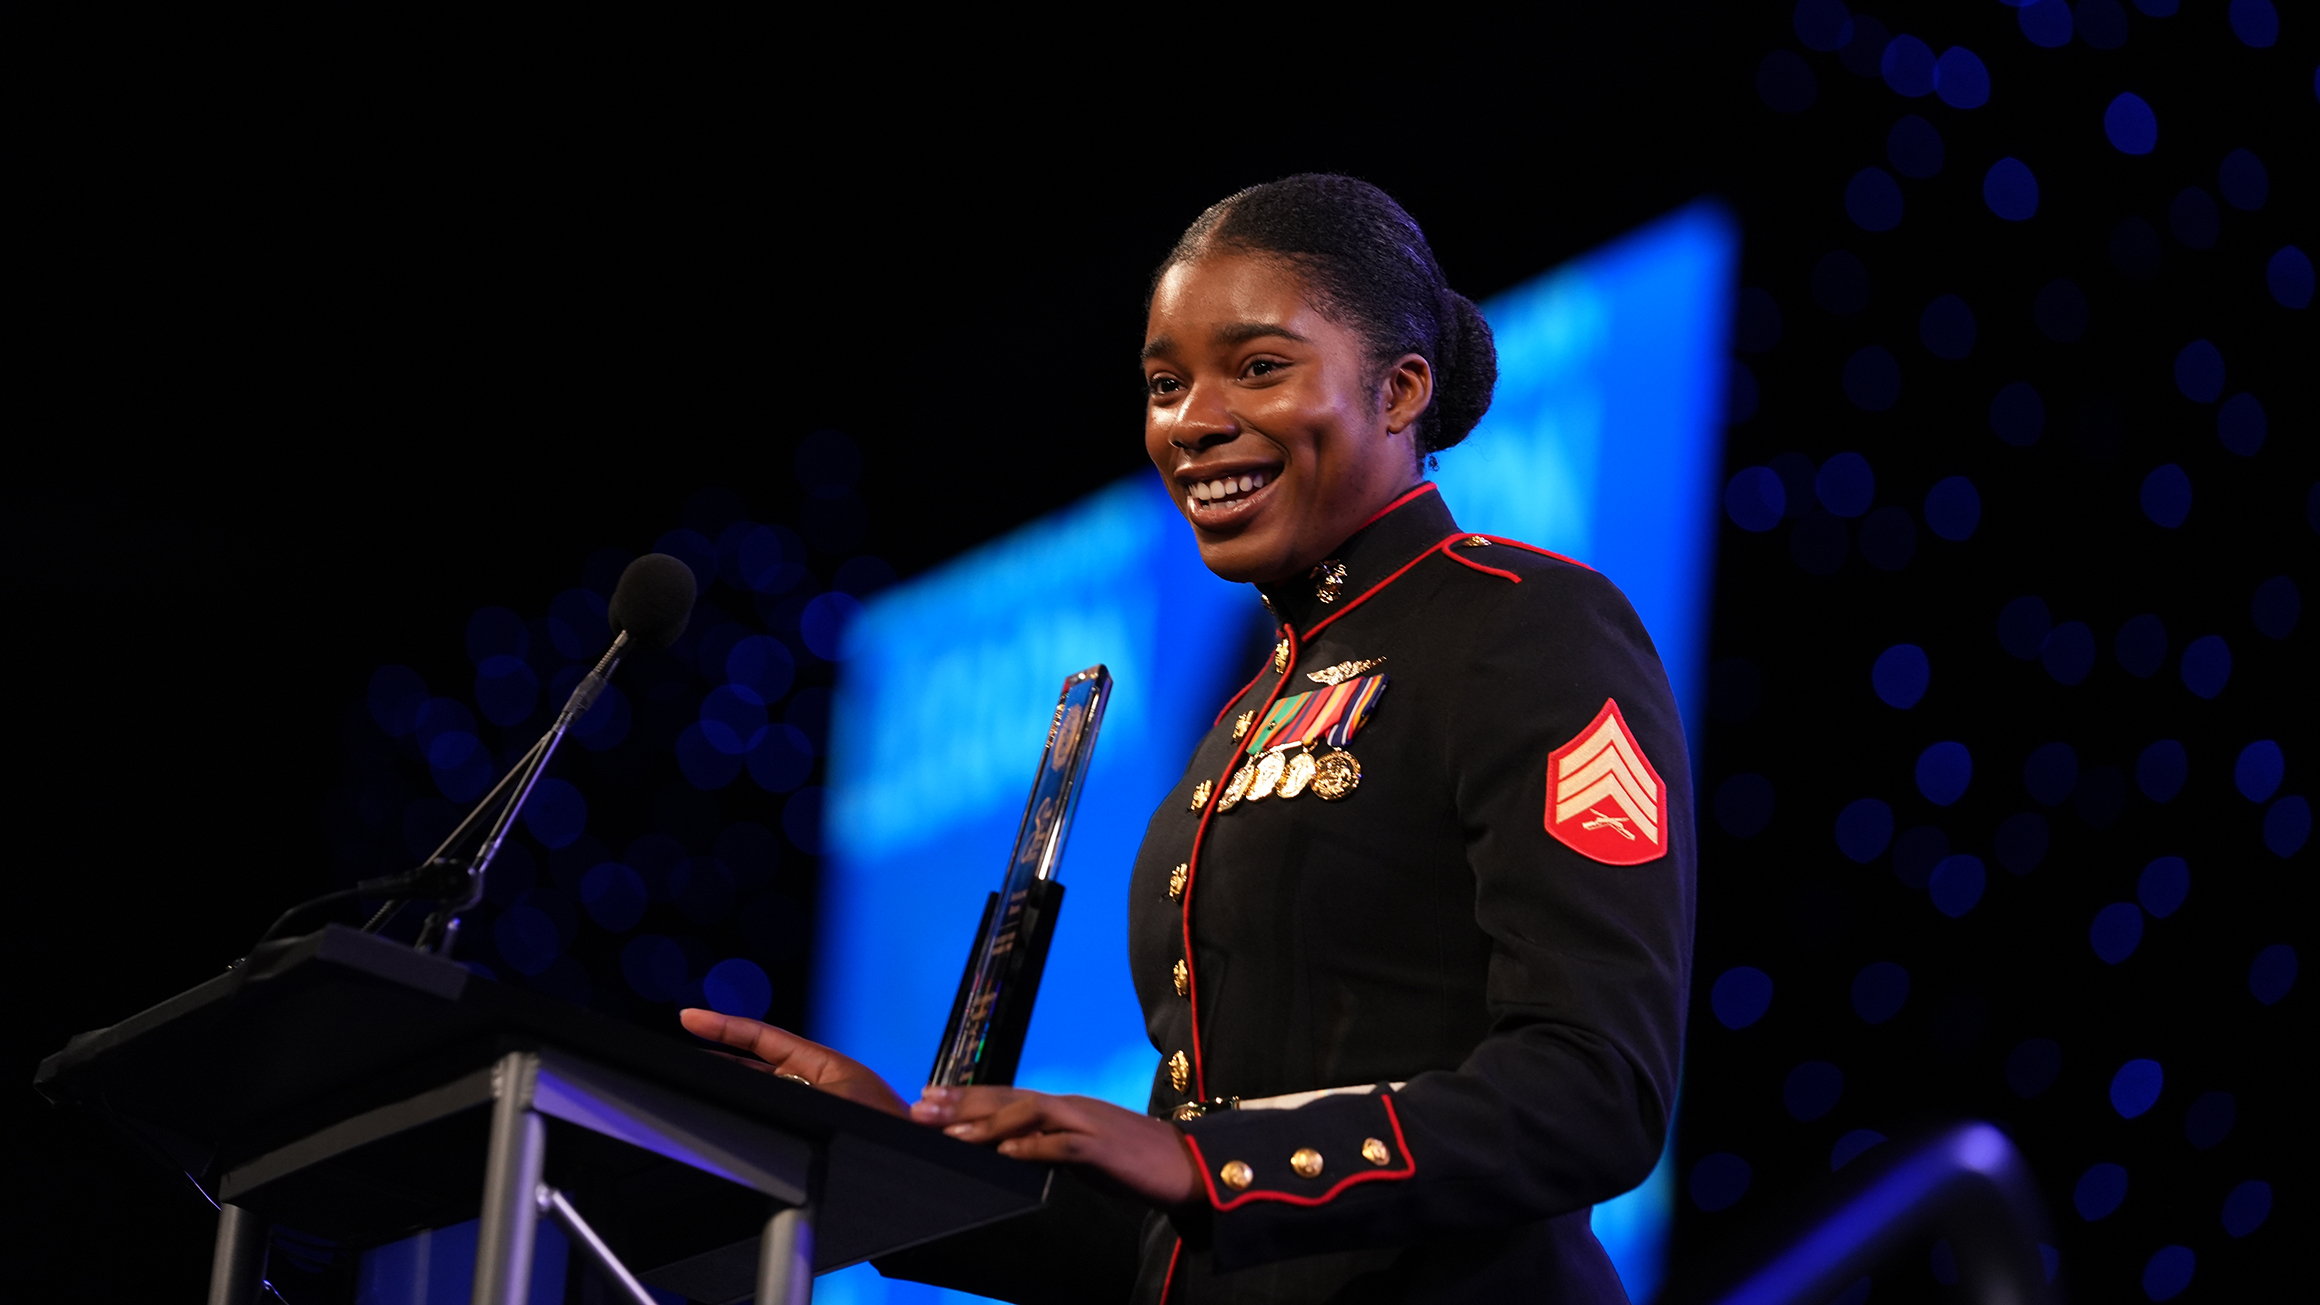 A woman in a military uniform stands at a podium and speaks to an audience.